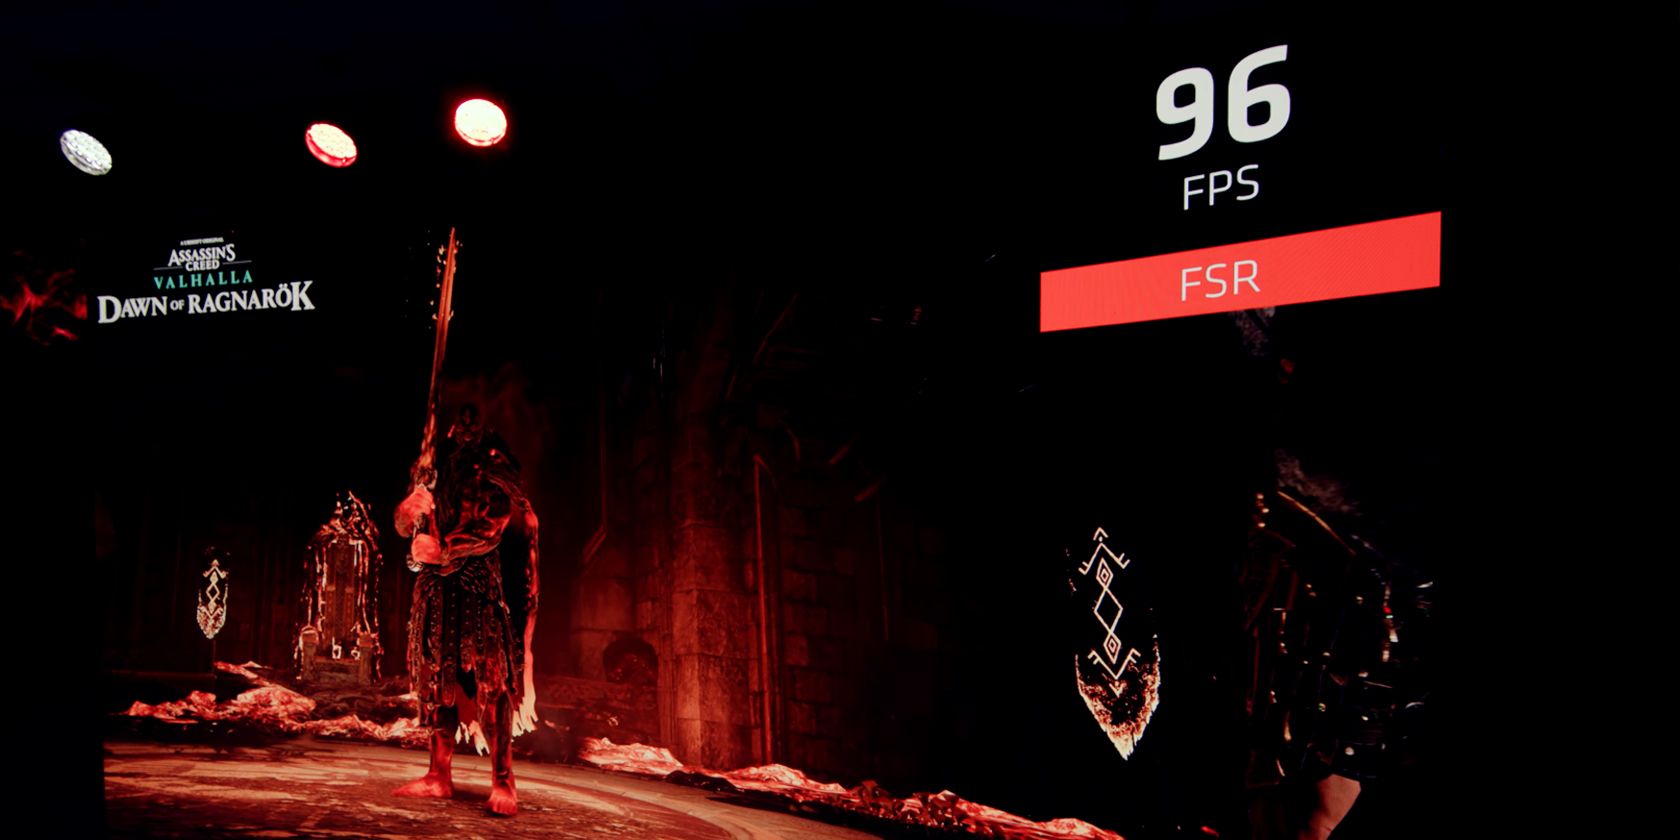 YouTube screenshot showing 96 FPS on an 8K display with FSR on